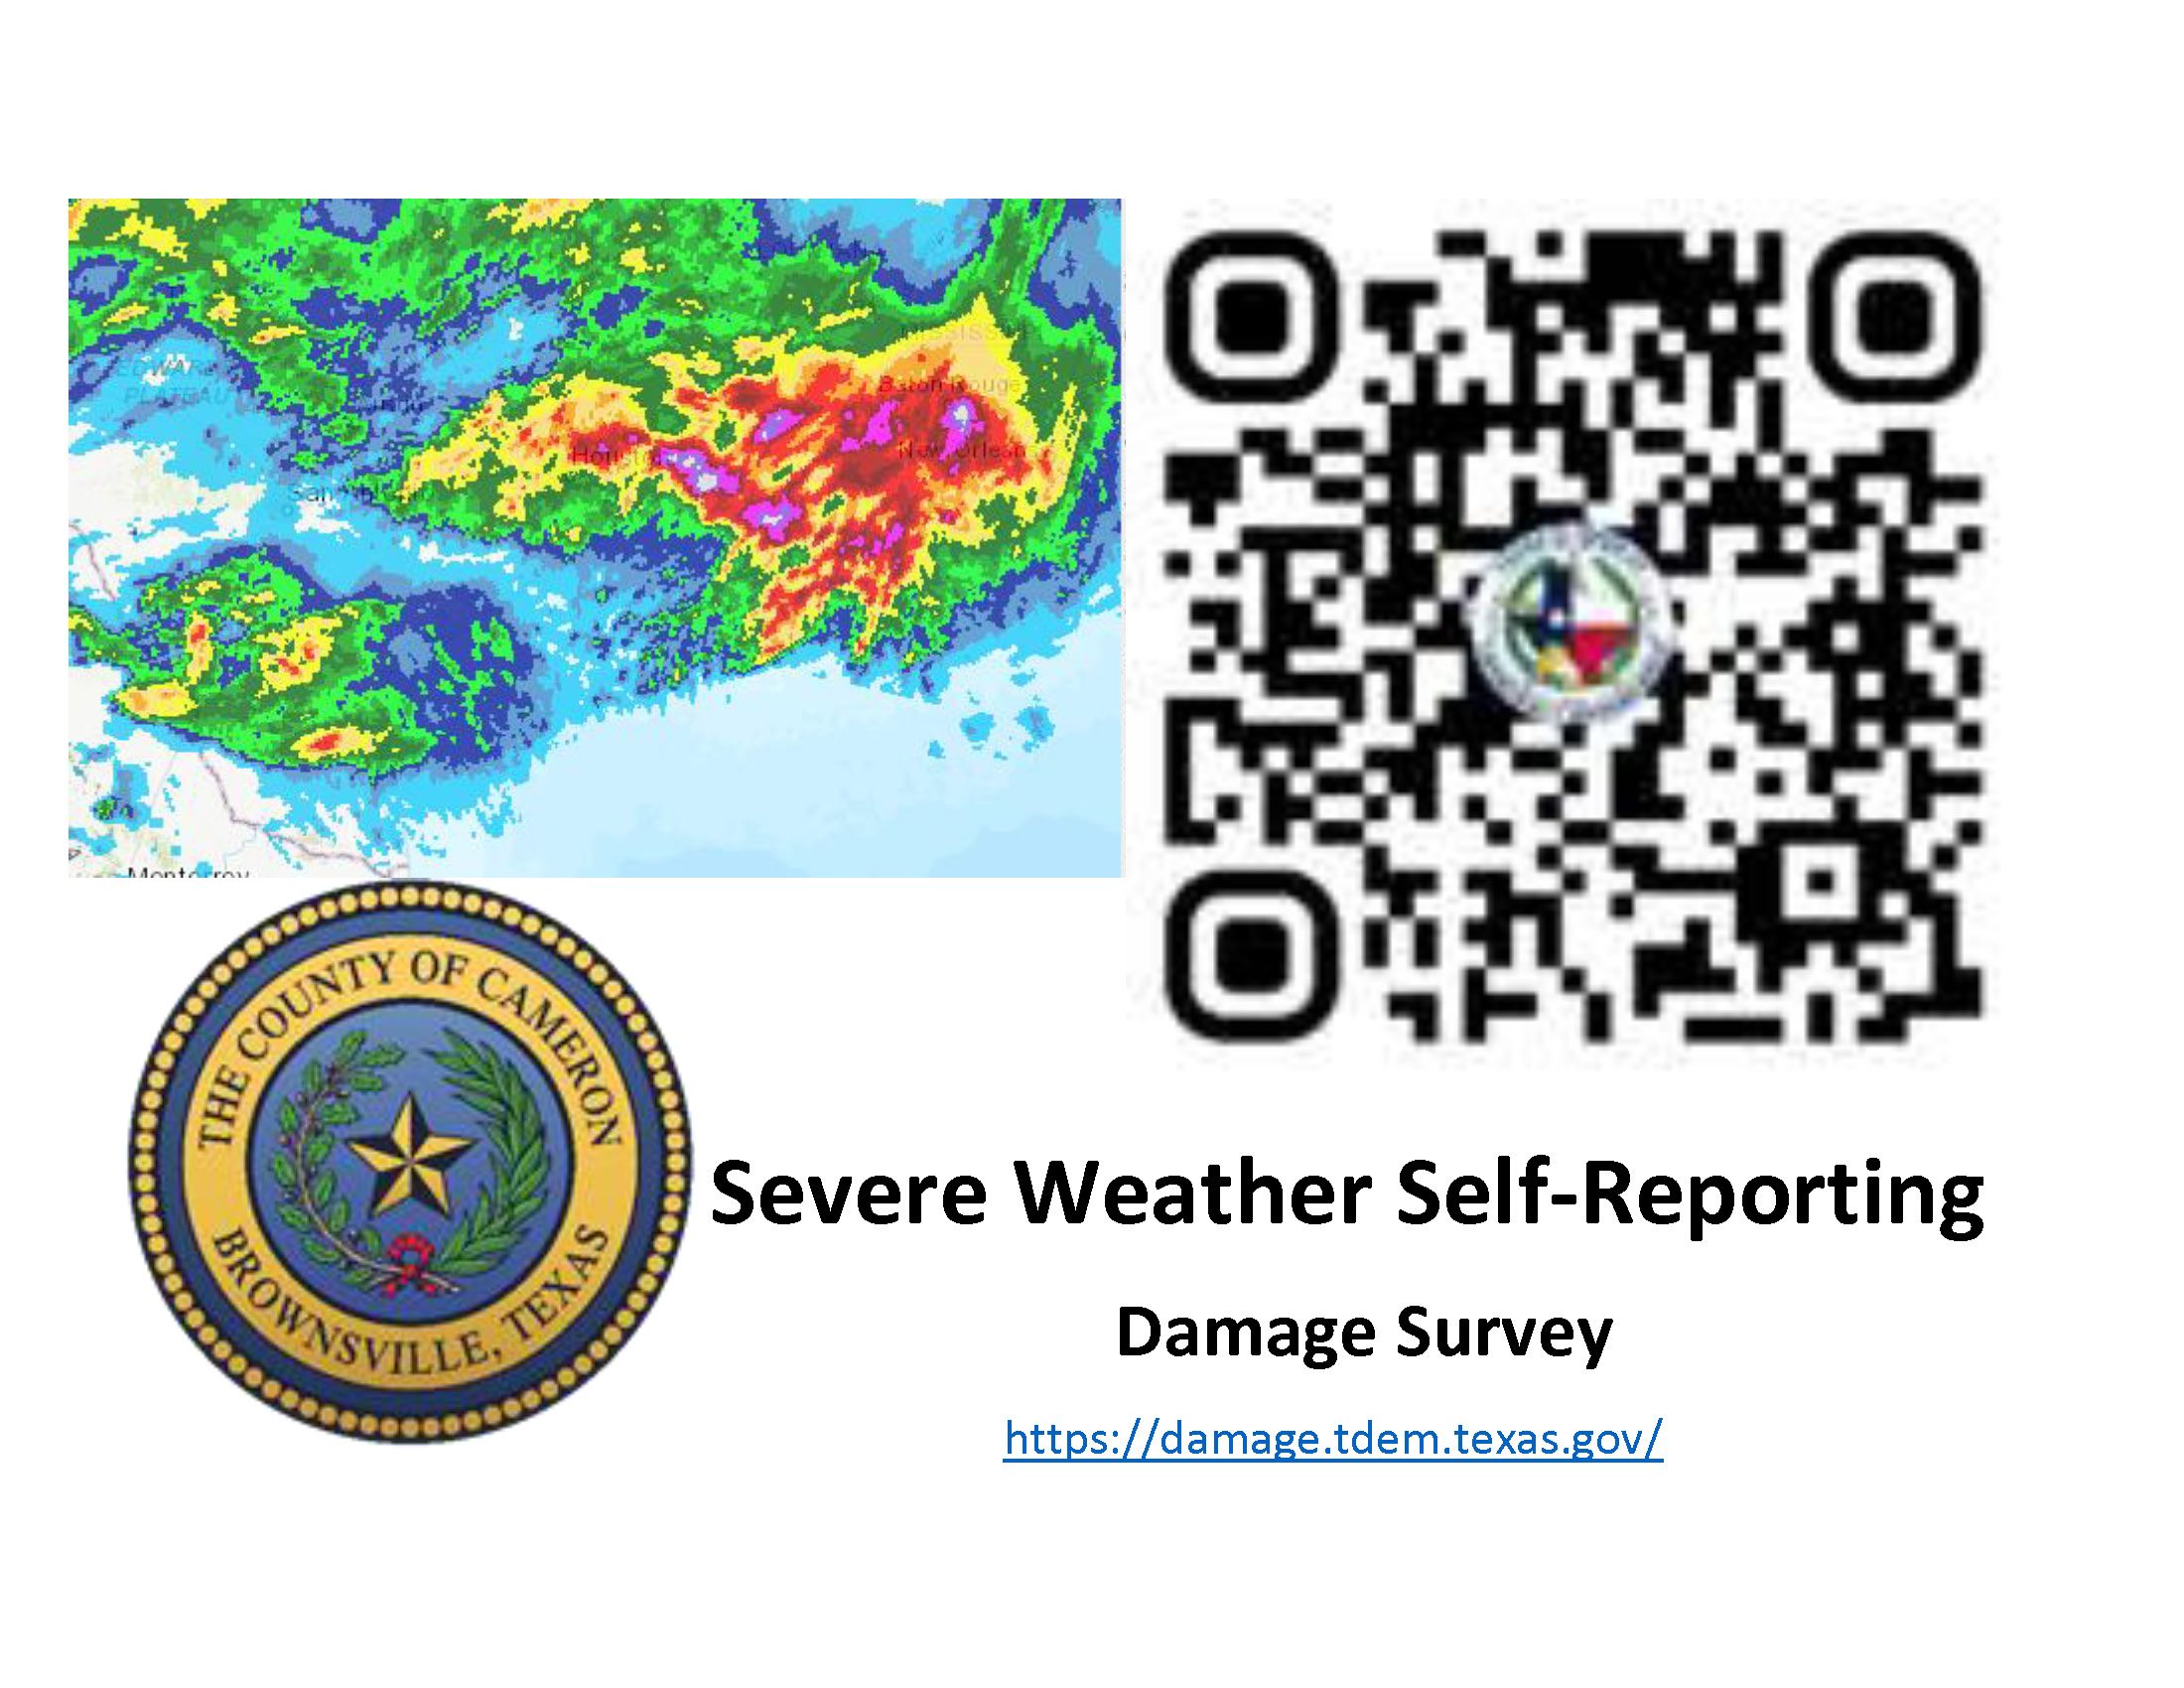 Severe Weather Self Reporting May 17th Event